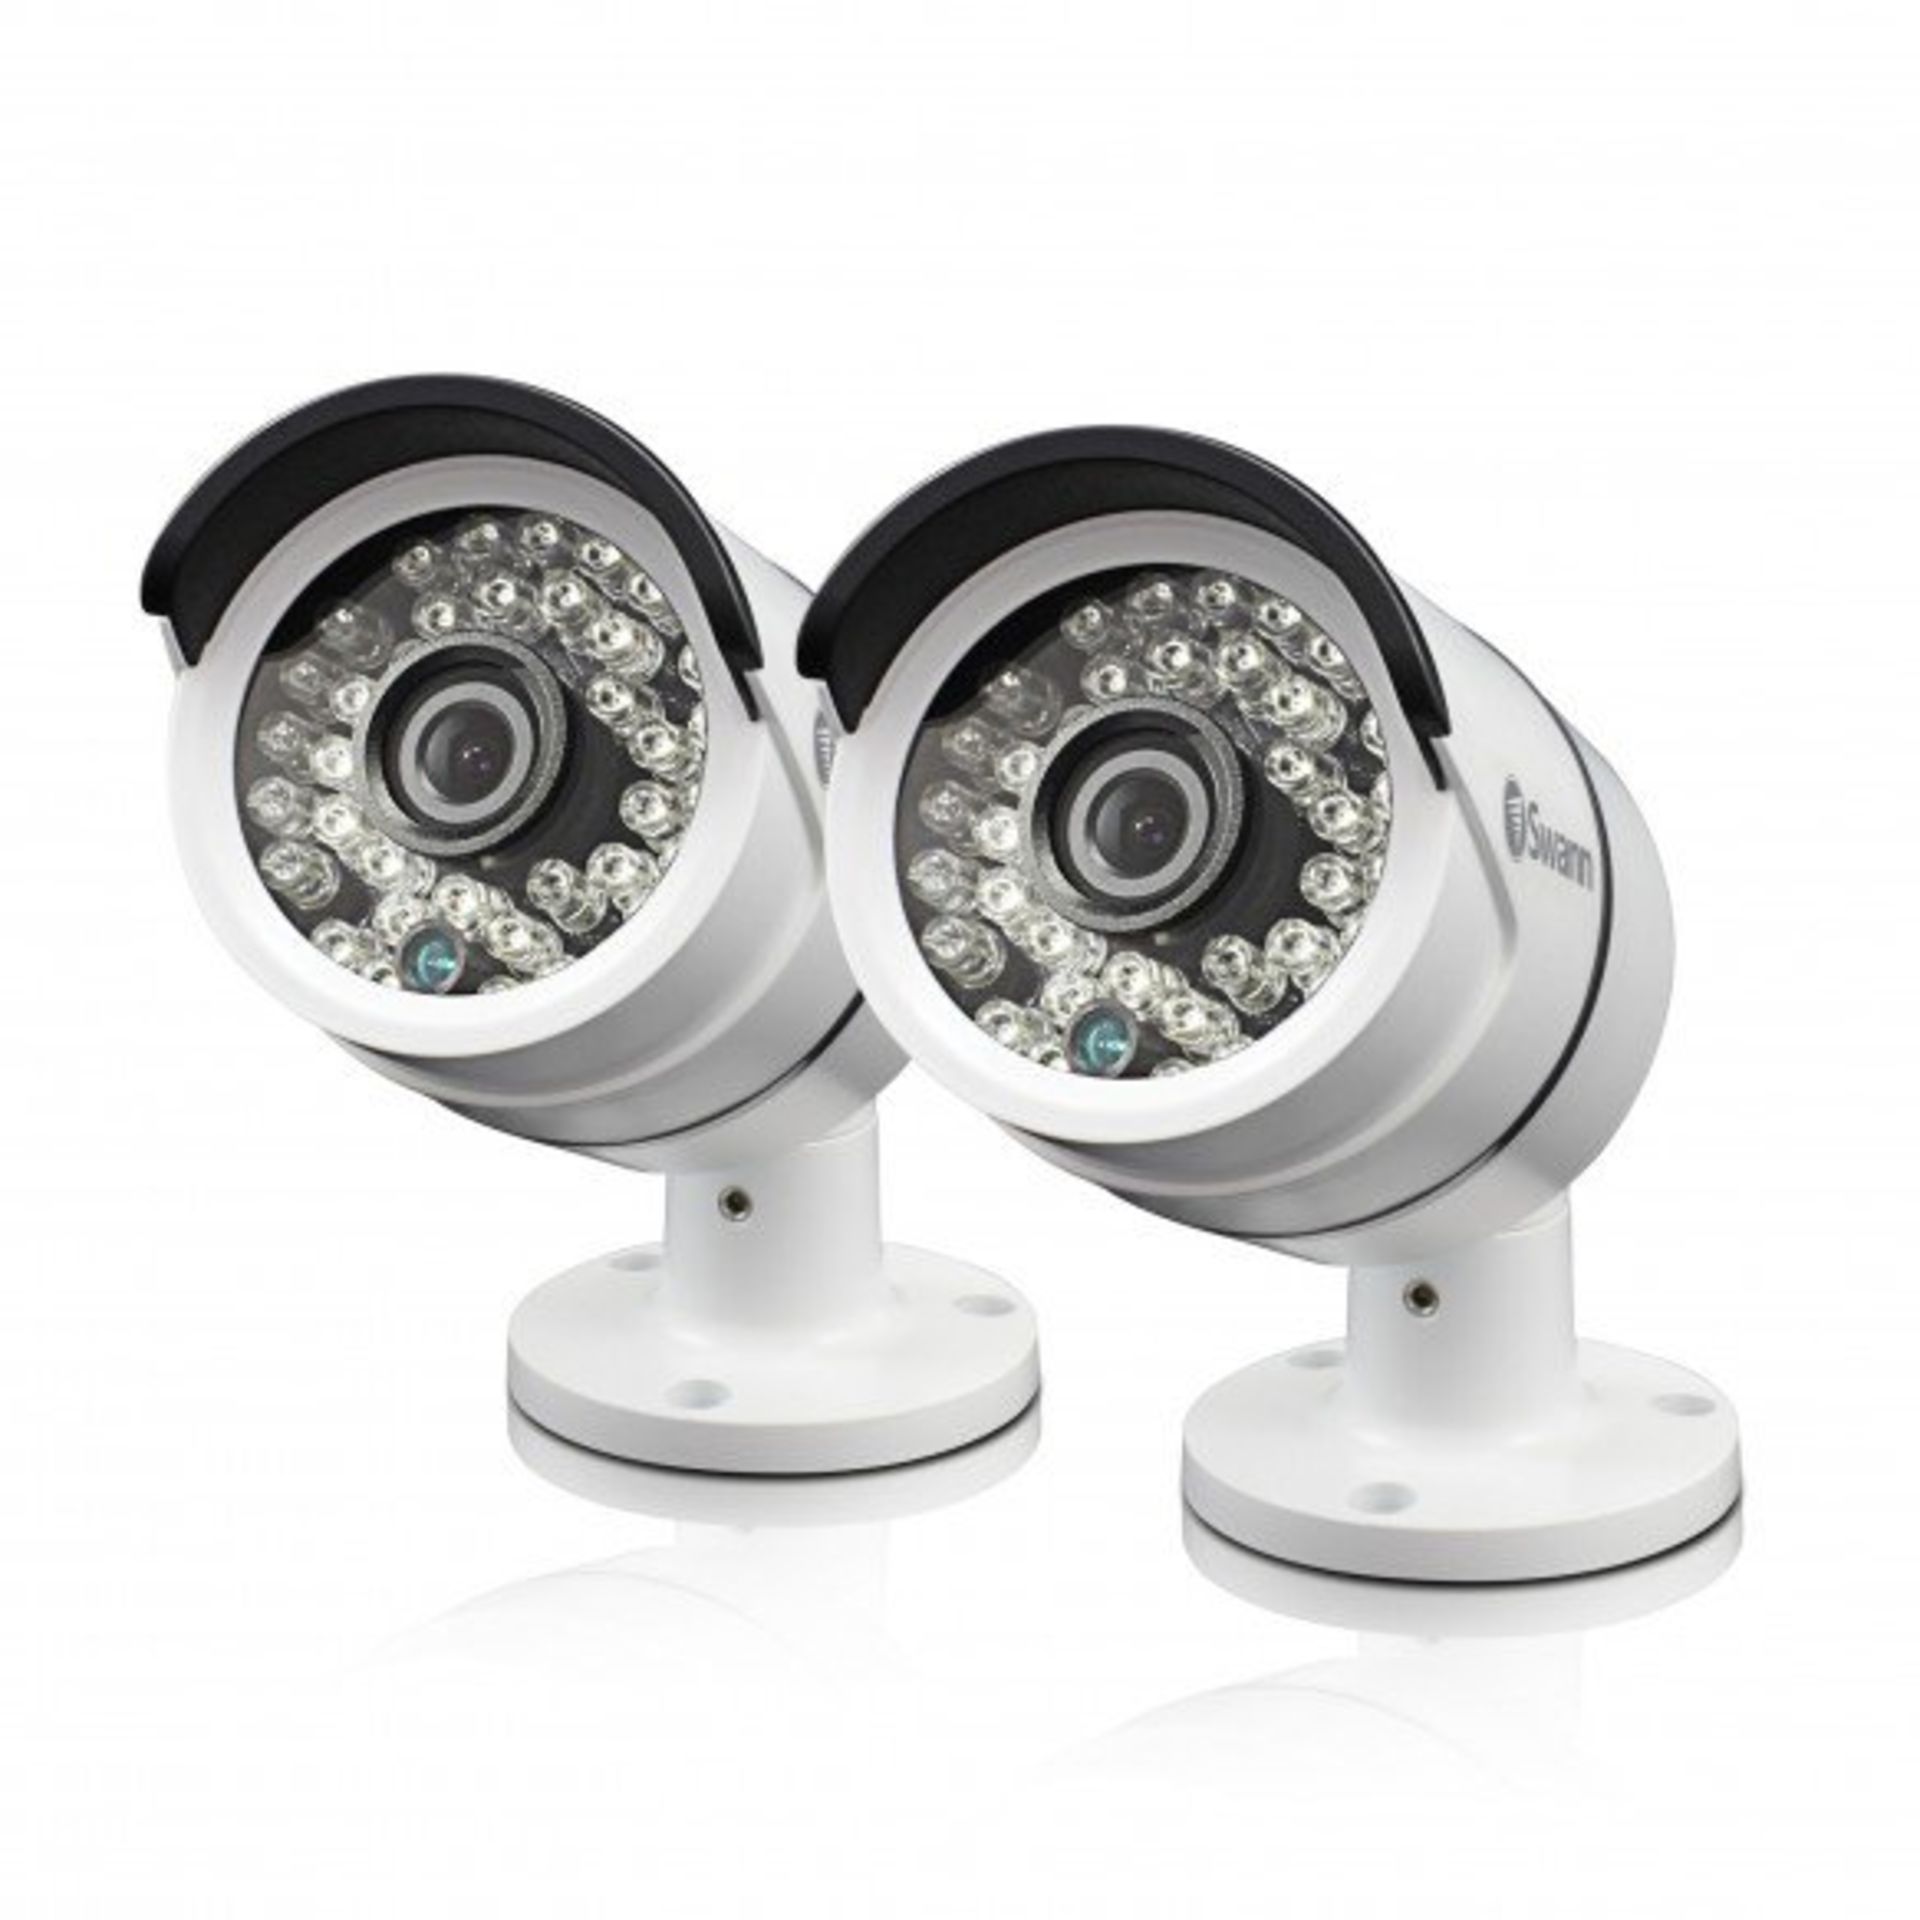 V Grade A Swann 855 PK2 Twin Pack Professional HD Security Cameras - 1080p - 30M Night Vision